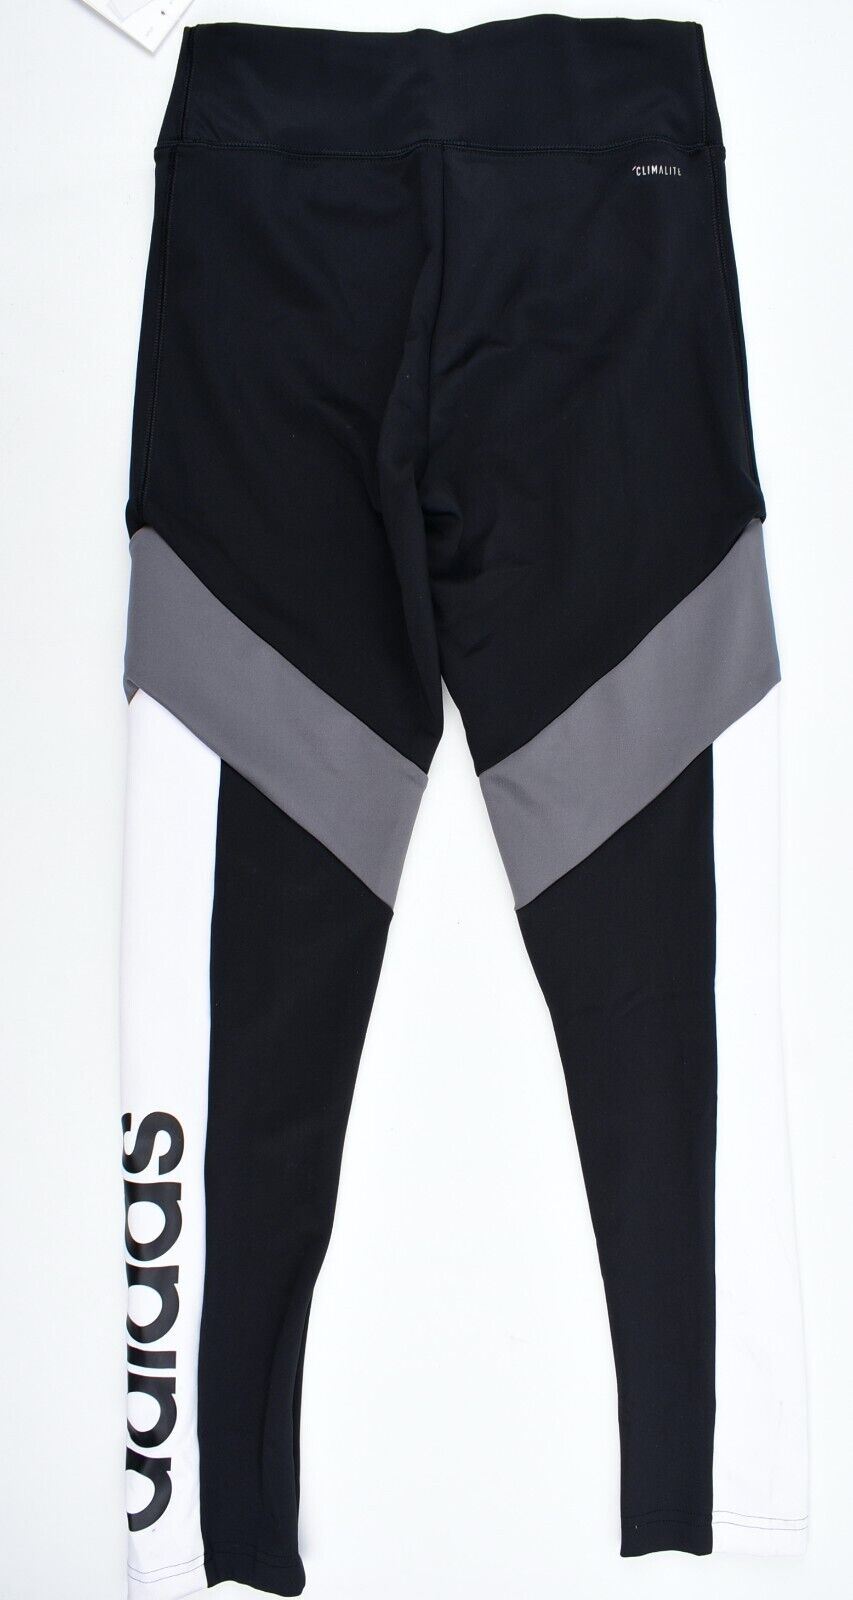 ADIDAS Womens D2M Designed to Move Activewear Leggings, Black/Grey/White size XS